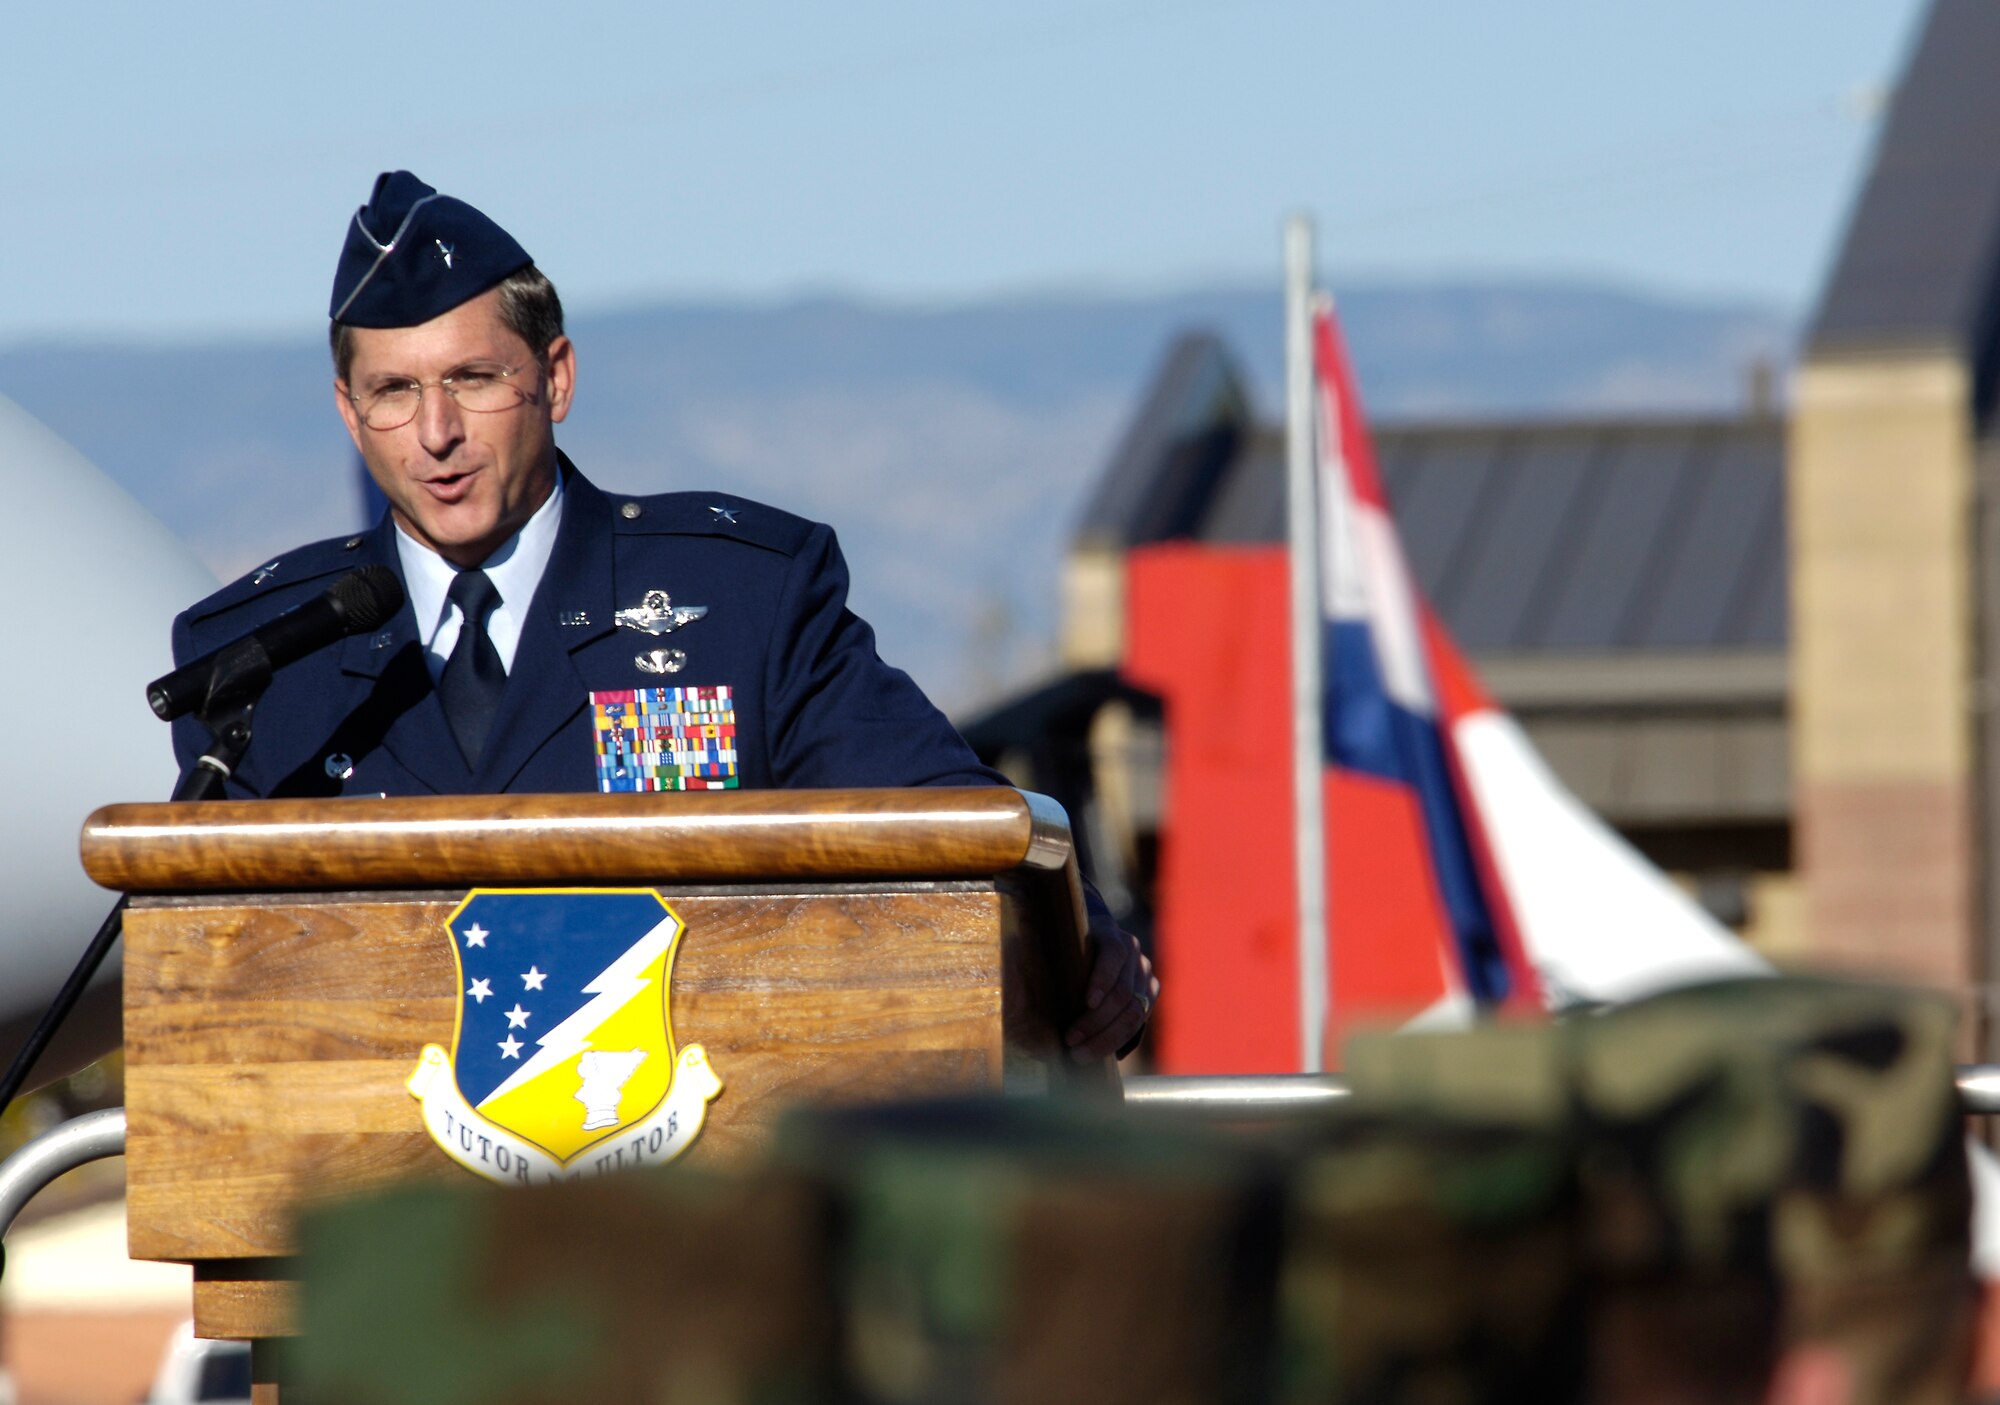 Brig. Gen. David Goldfein speaks at the 25th Anniversary celebration of the F-117 Nighthawk at Holloman Air Force Base, N.M. Many of the people who developed the aircraft and worked on it over the last 25 years attended. General Goldfein is the 49th Fighter Wing commander. (U.S. Air Force photo/Senior Airman Brian Ferguson)